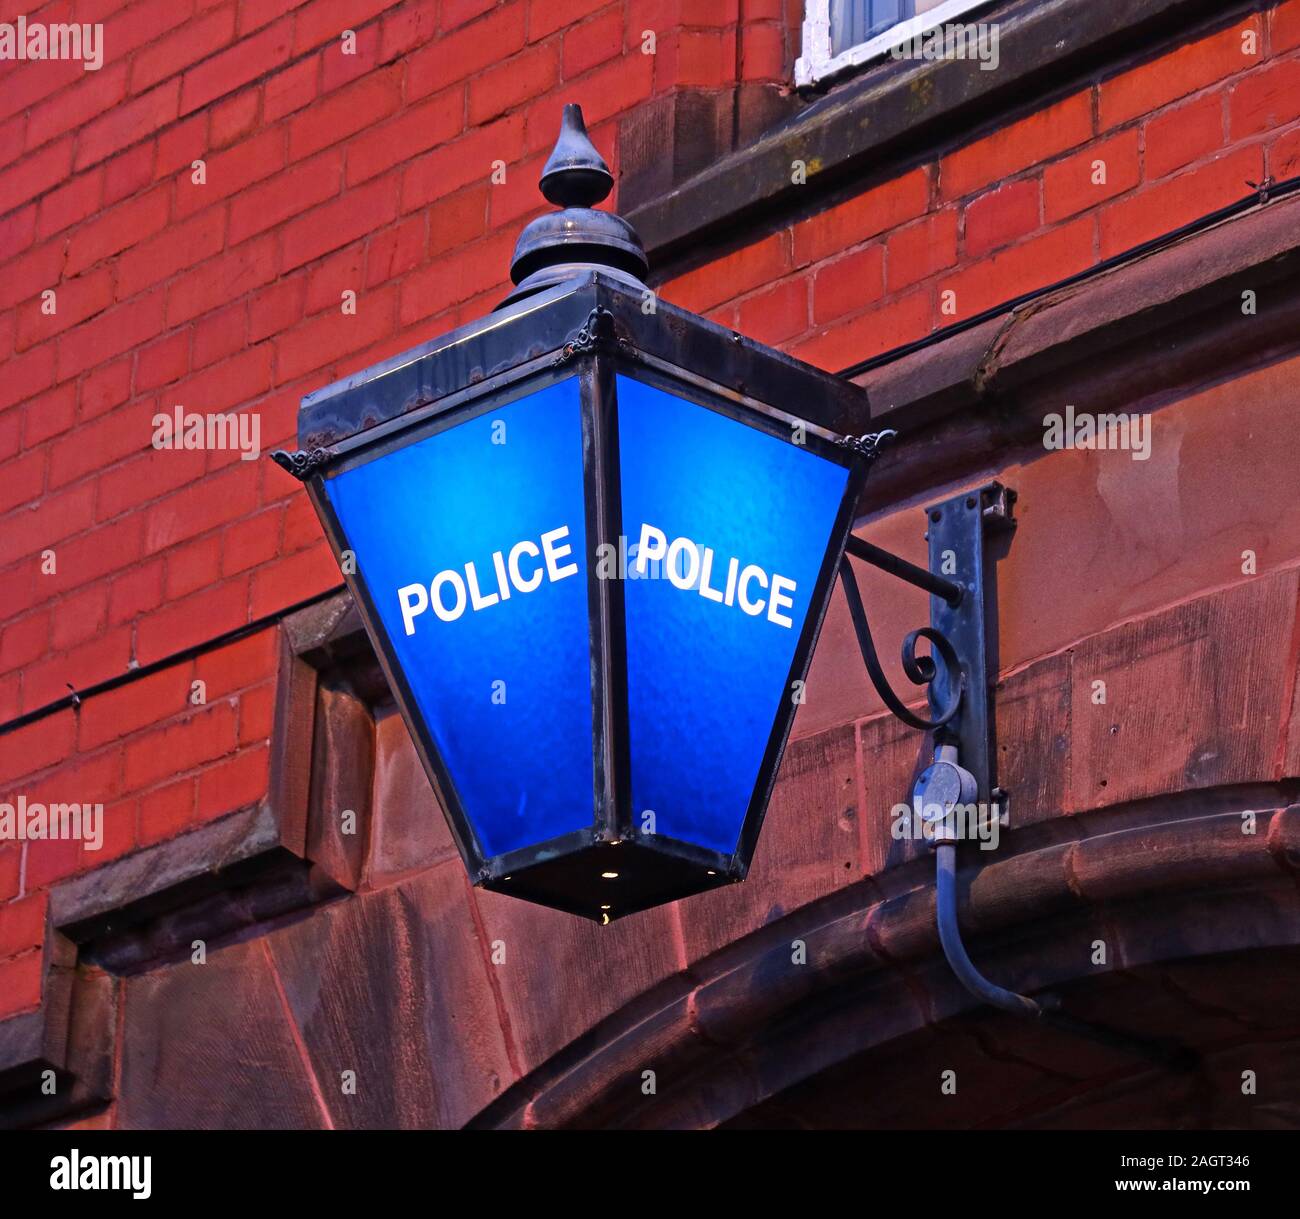 Dixon of Dock Green Bleu Lampe type British Police, Police, Grappenhall Road, Stockton Heath, Warrington, Cheshire, Angleterre, Royaume-Uni, WA4 2AF Banque D'Images